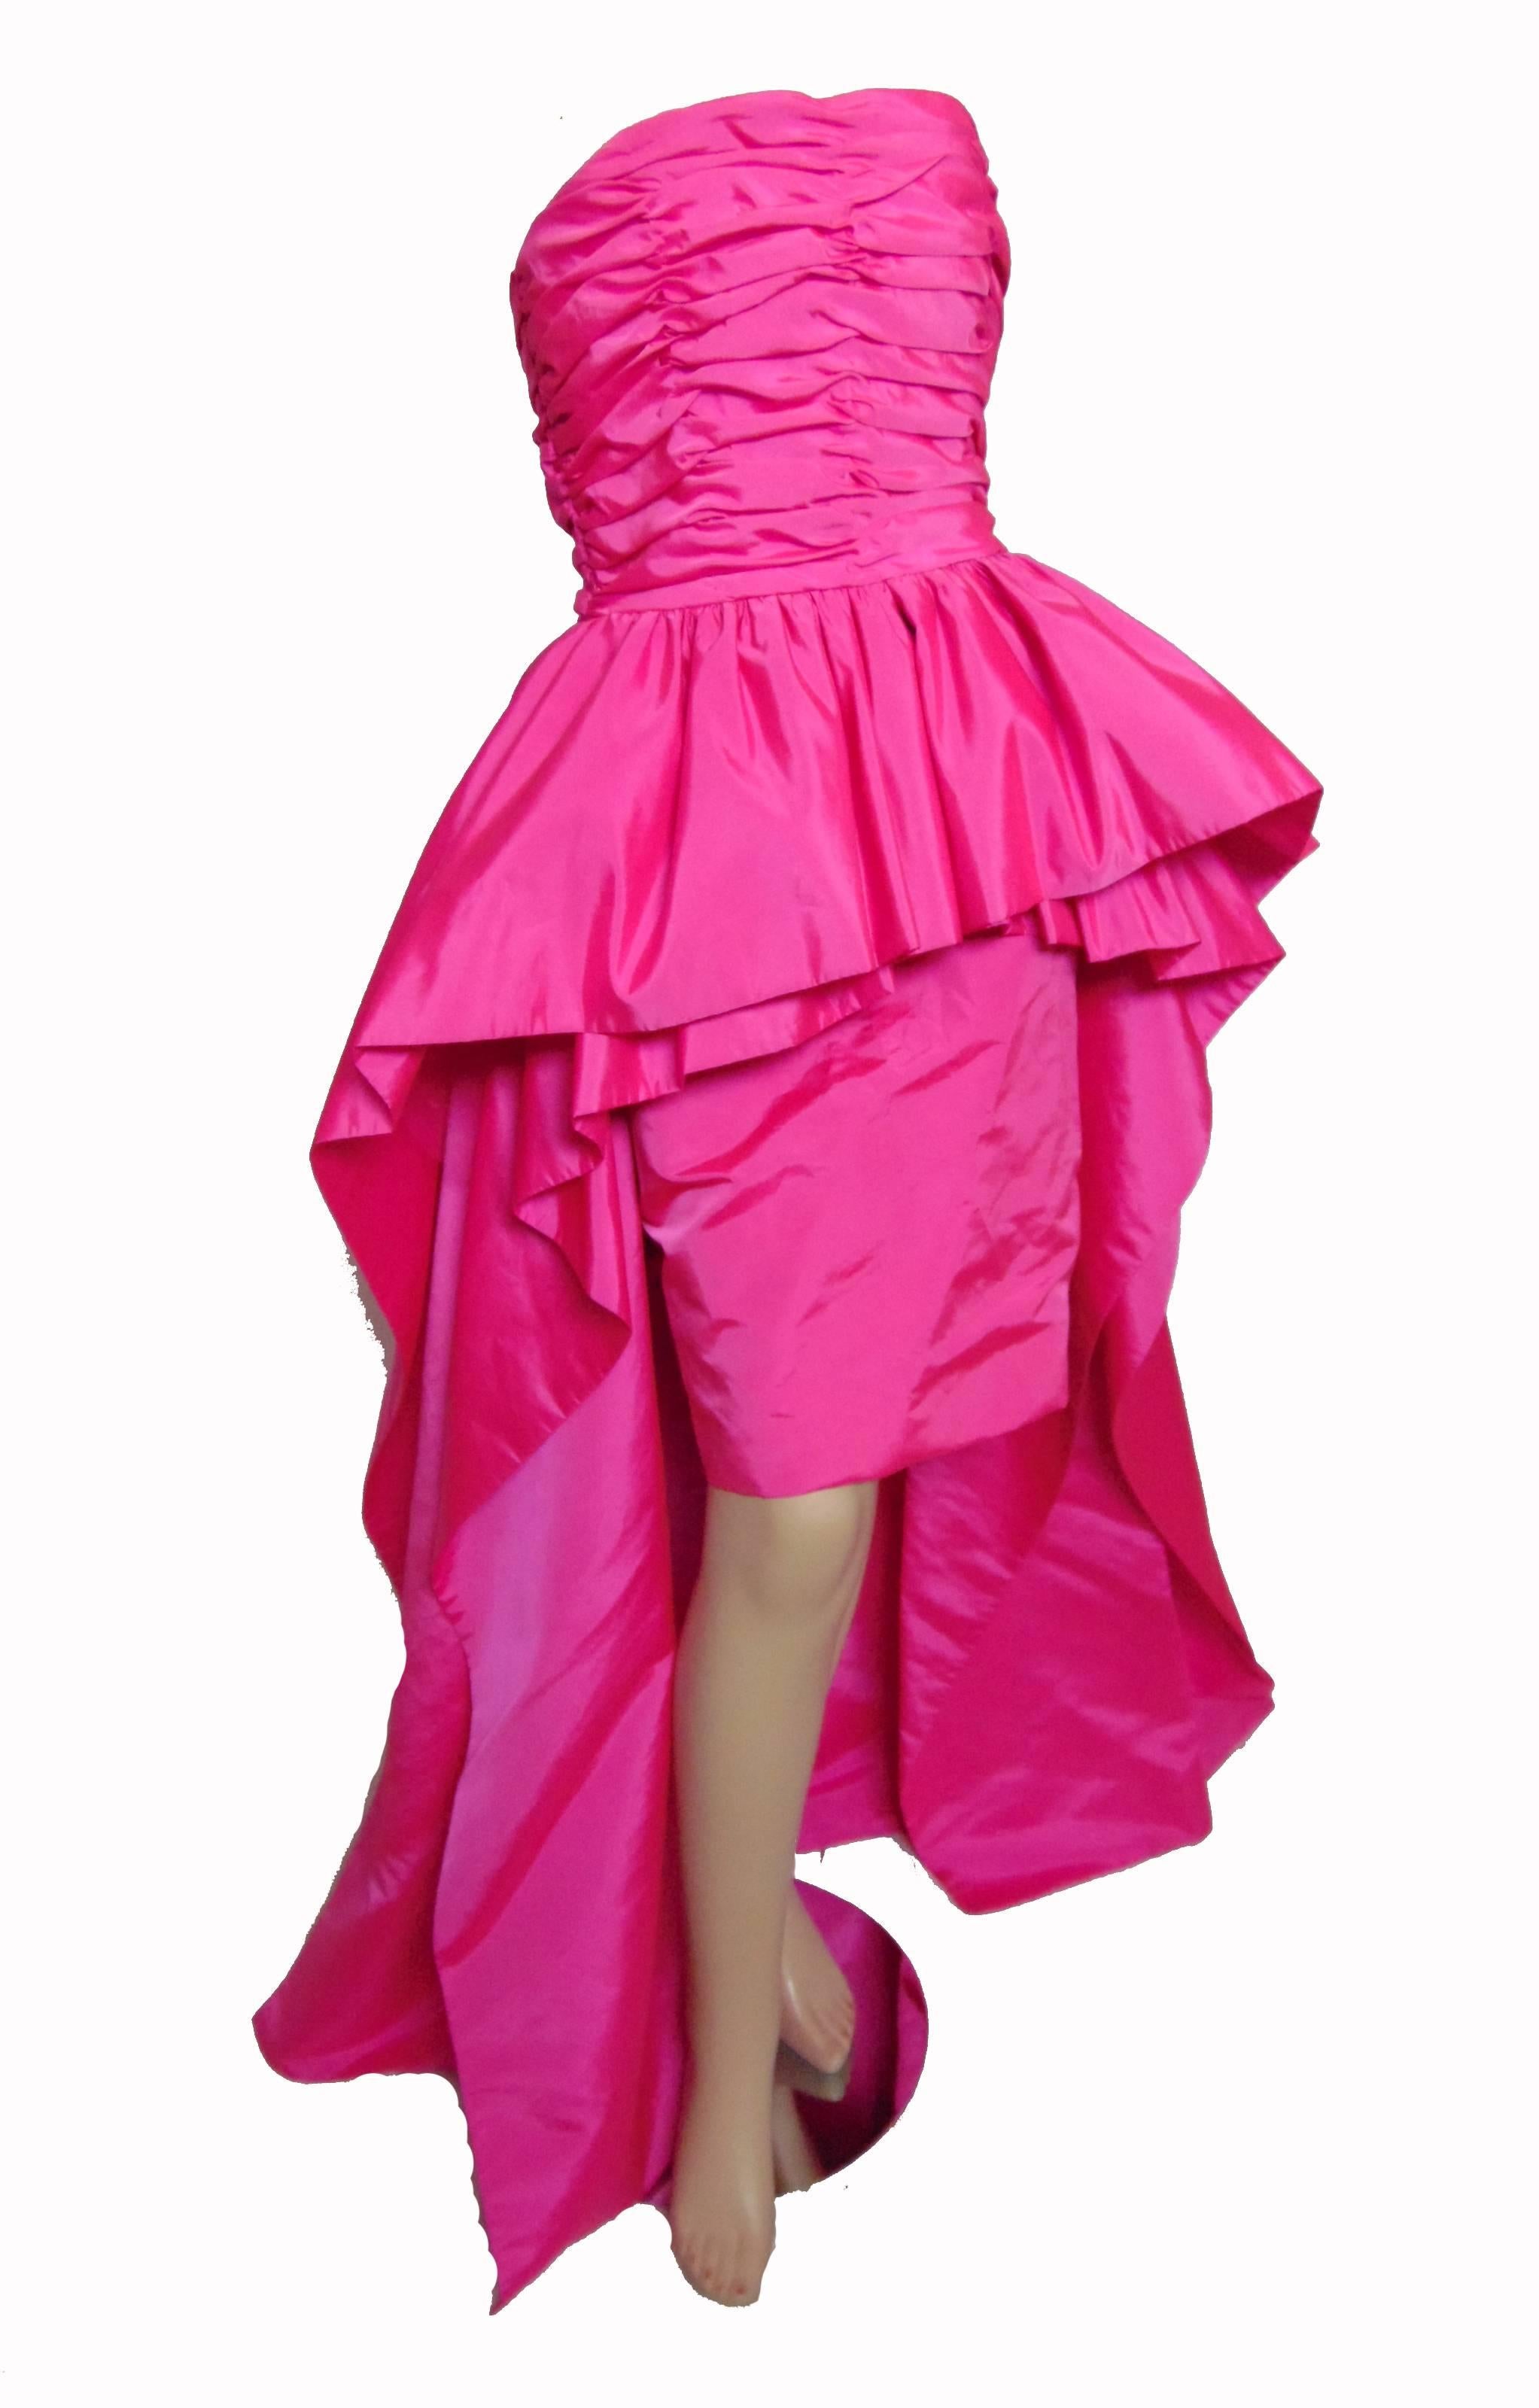 This fabulous evening gown was made by Victor Costa for Saks Fifth Avenue, likely in the late 1990s.  This piece features a sheath base dress with layers of pink taffeta fabric that ruffles at the center and falls to the floor in back! Each layer